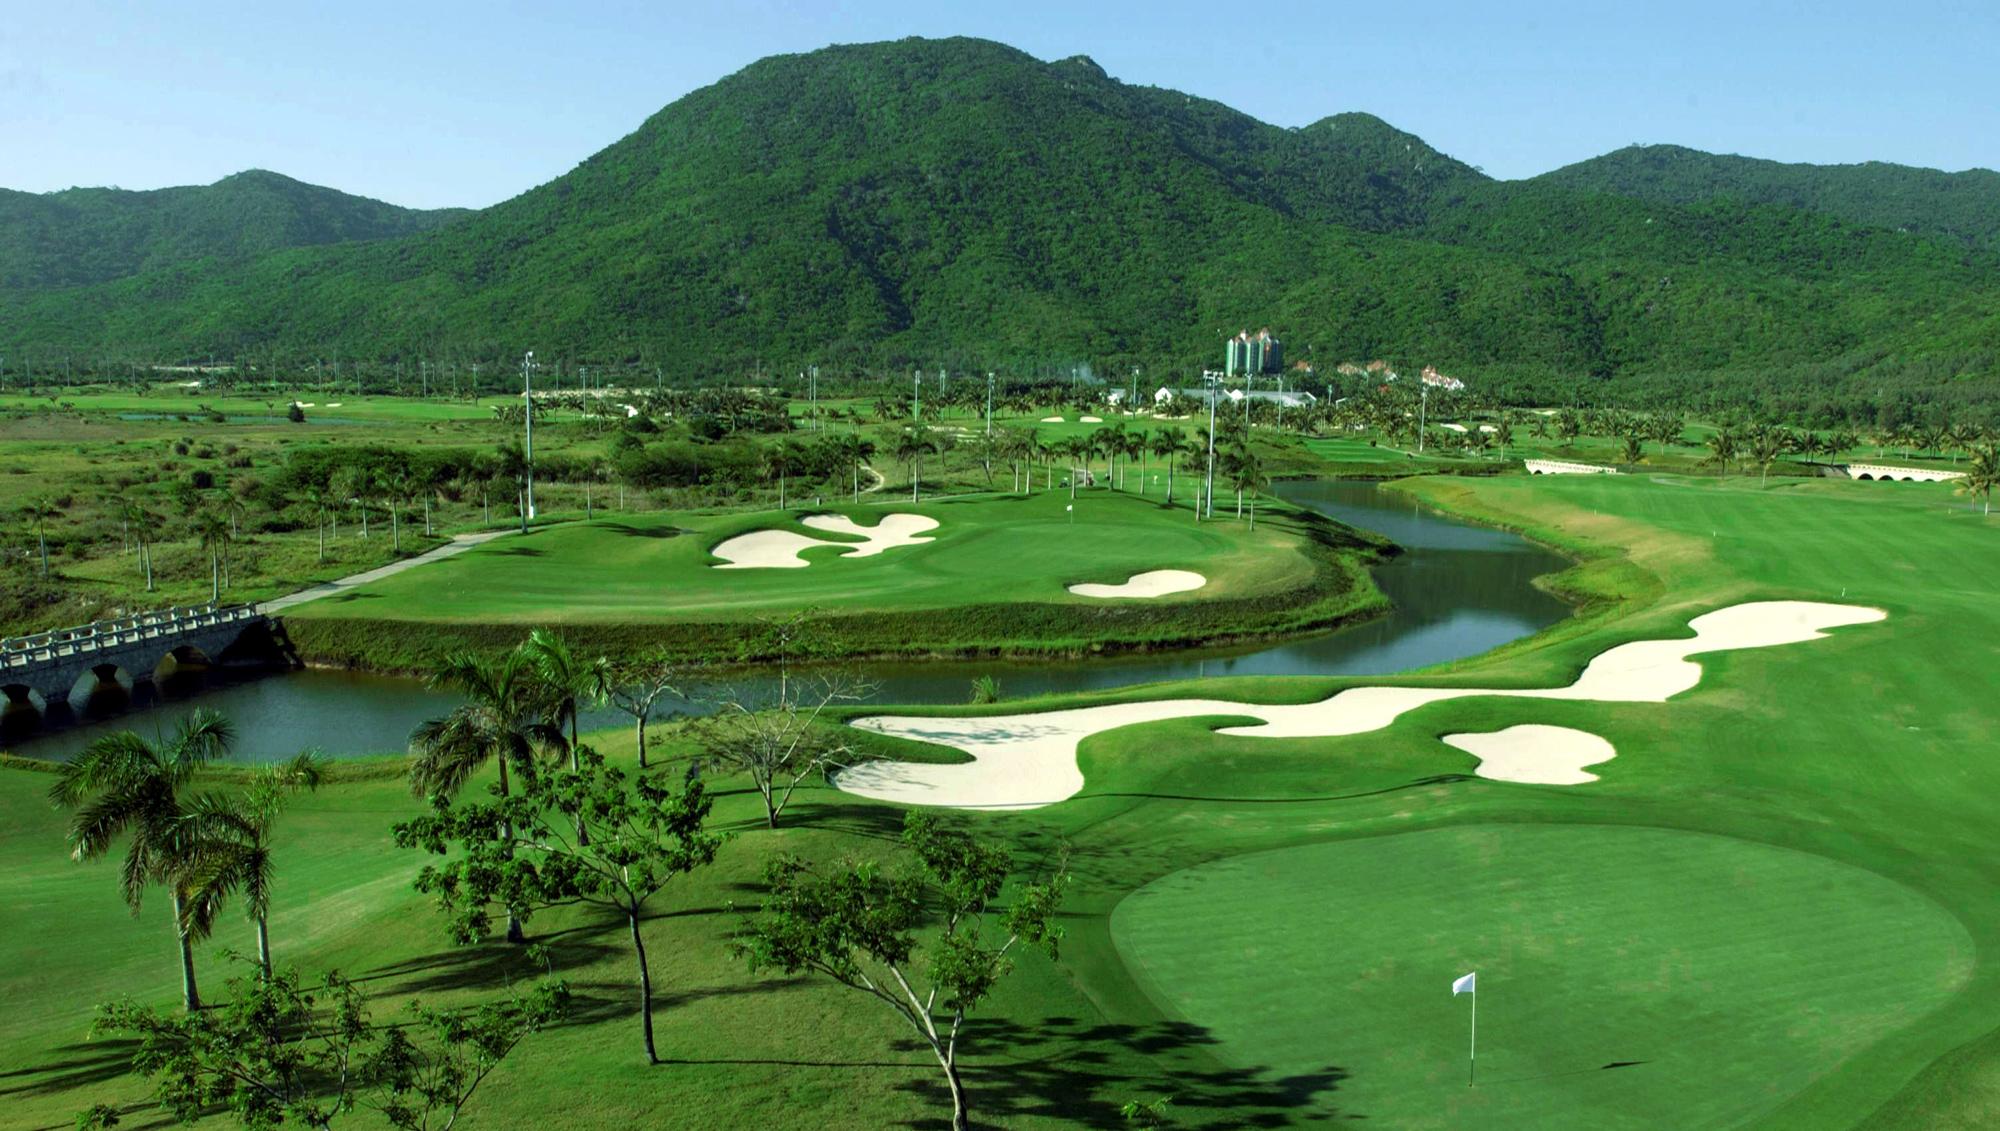 The Sanya Luhuitou Golf Course's lovely golf course in gorgeous China.